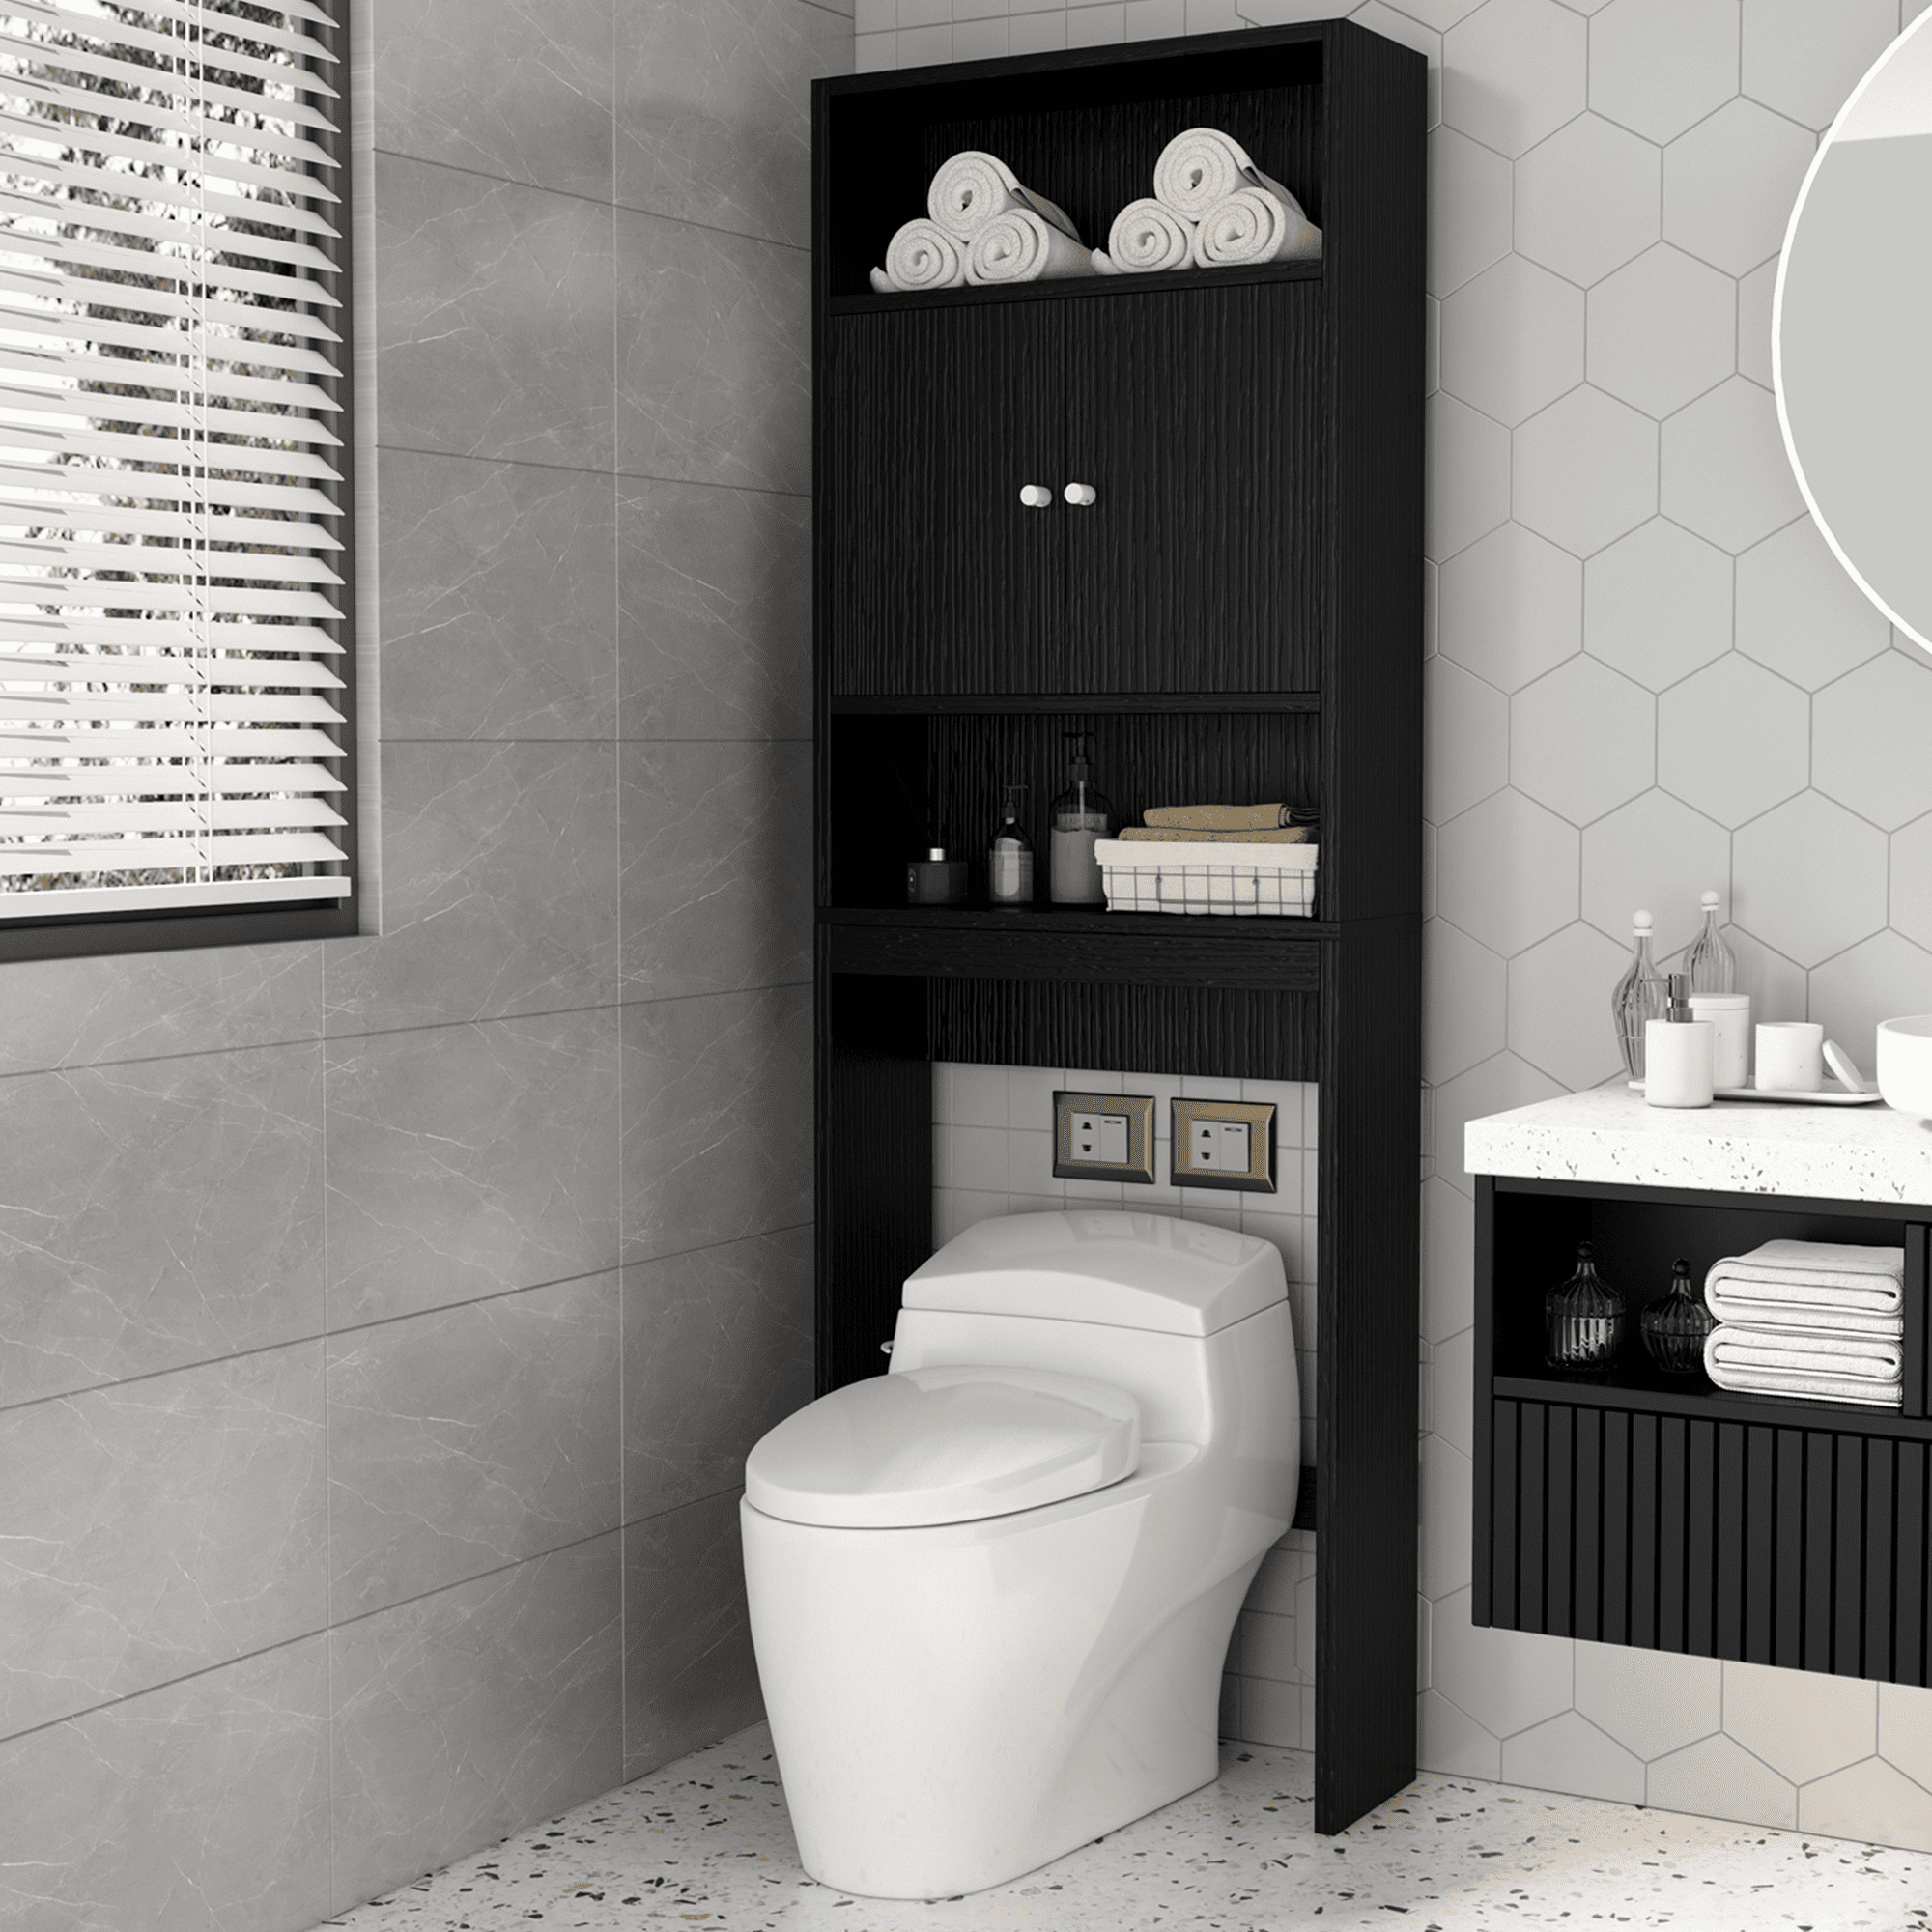 Bathroom Cabinets Over the Toilet and More Storage Ideas You'll Love